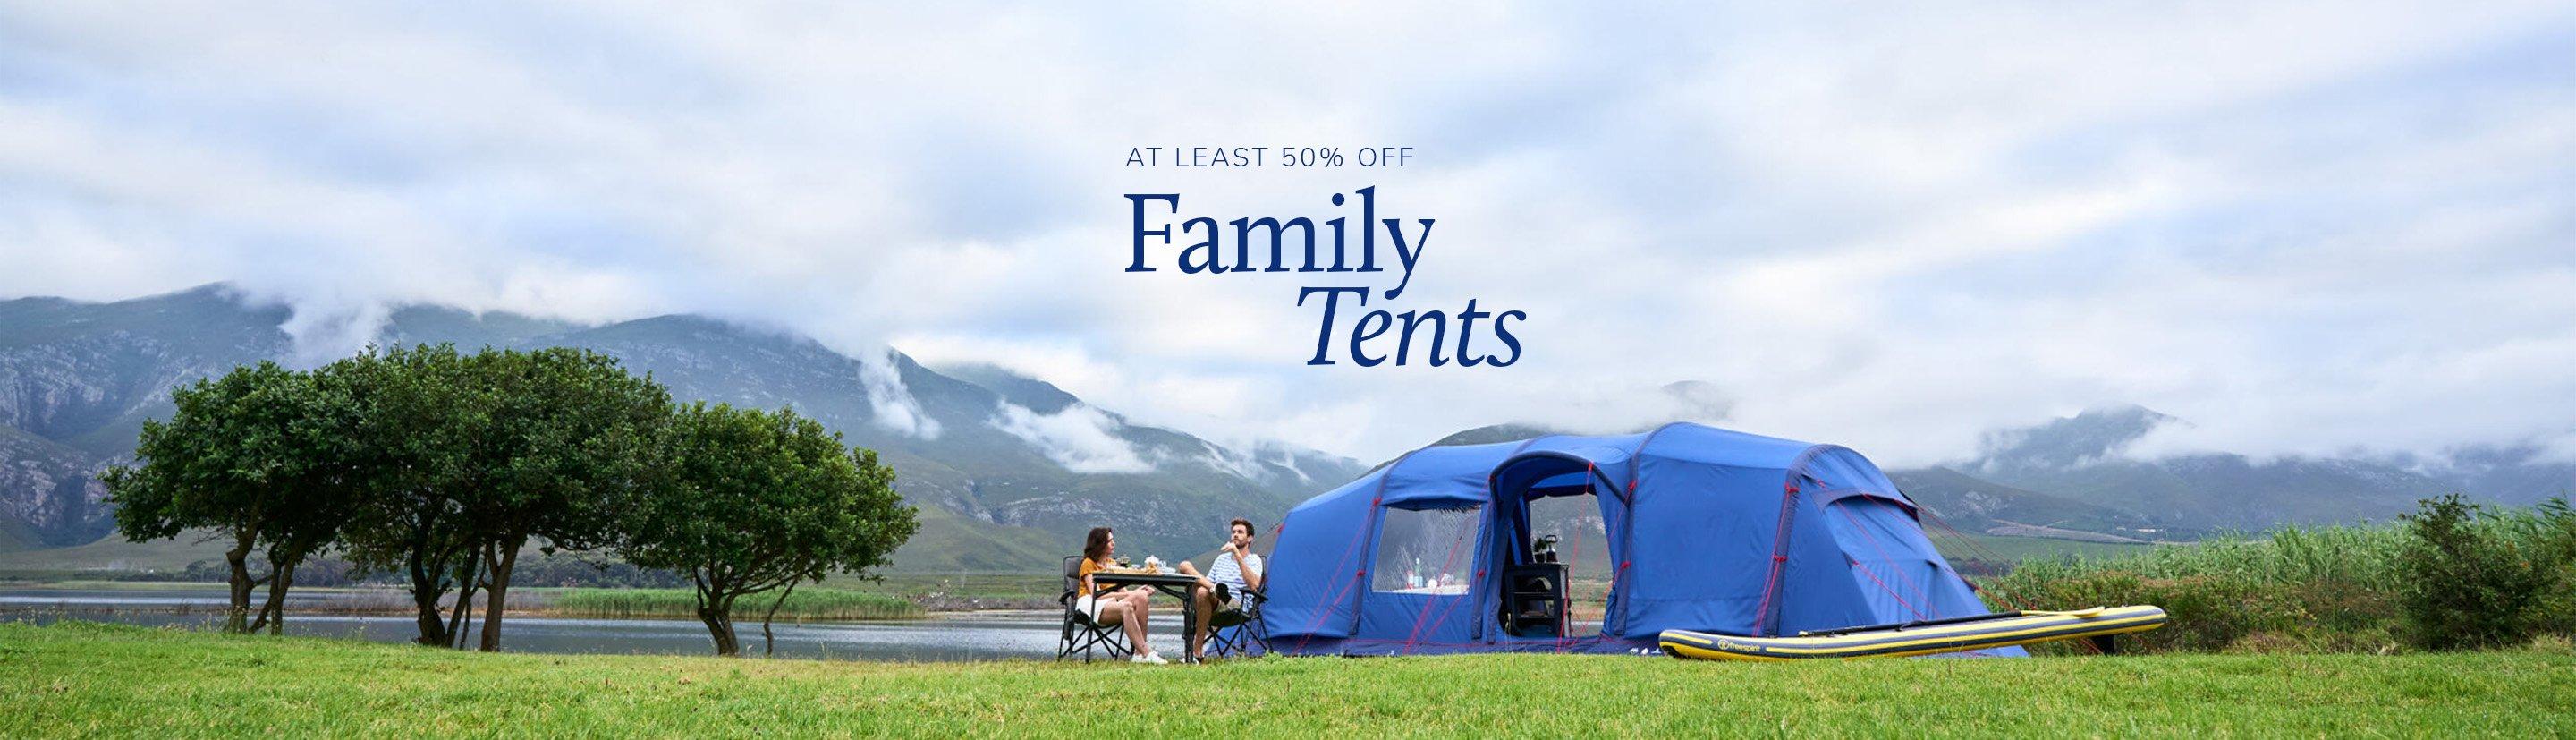 At Least 50% off Family Tents